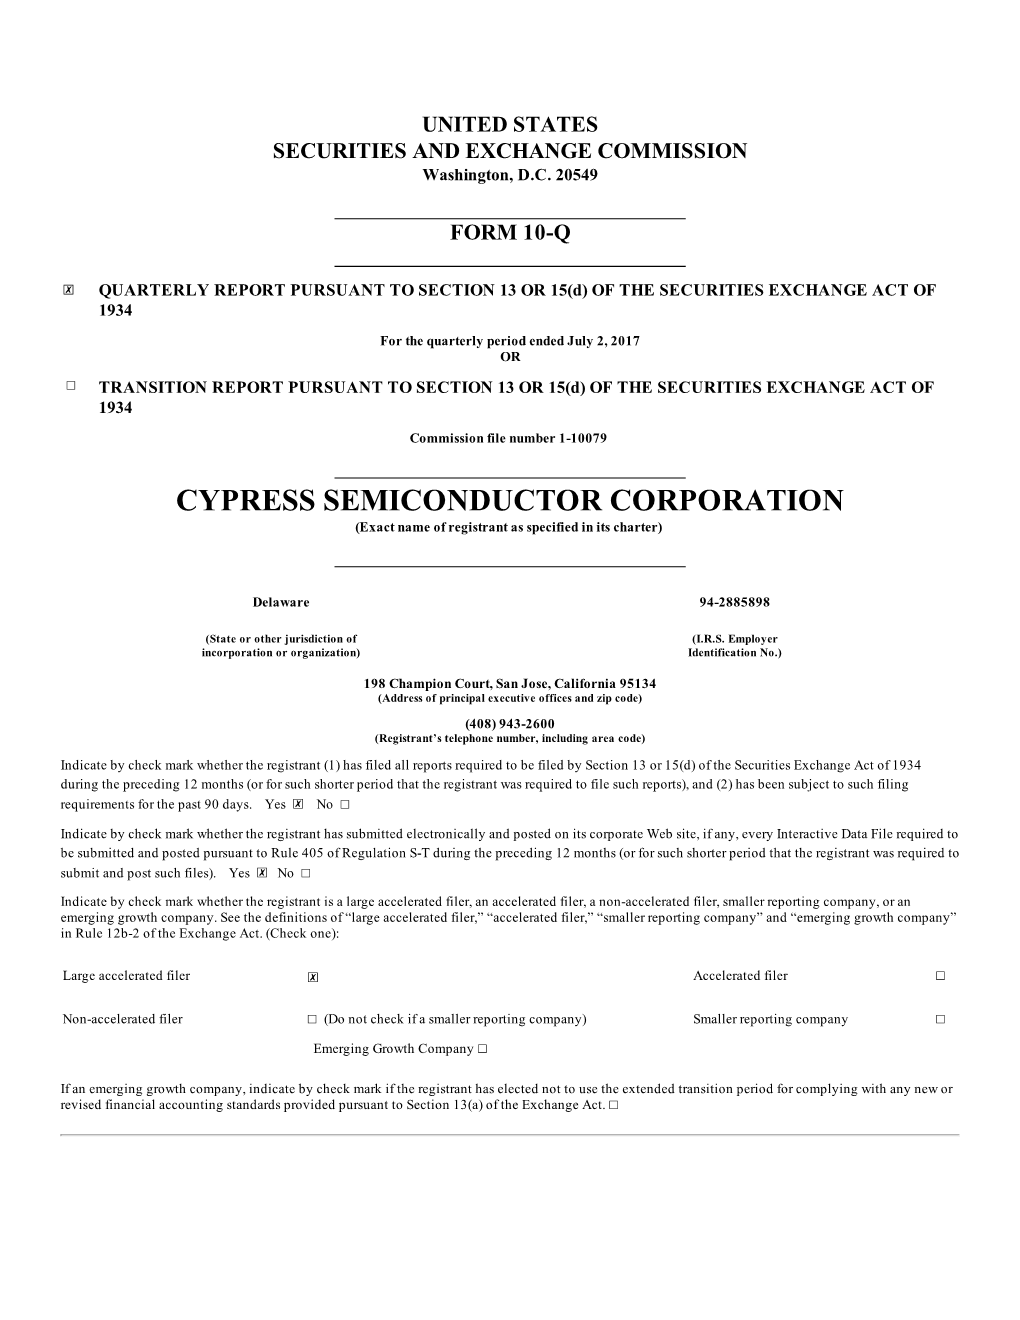 CYPRESS SEMICONDUCTOR CORPORATION (Exact Name of Registrant As Specified in Its Charter)